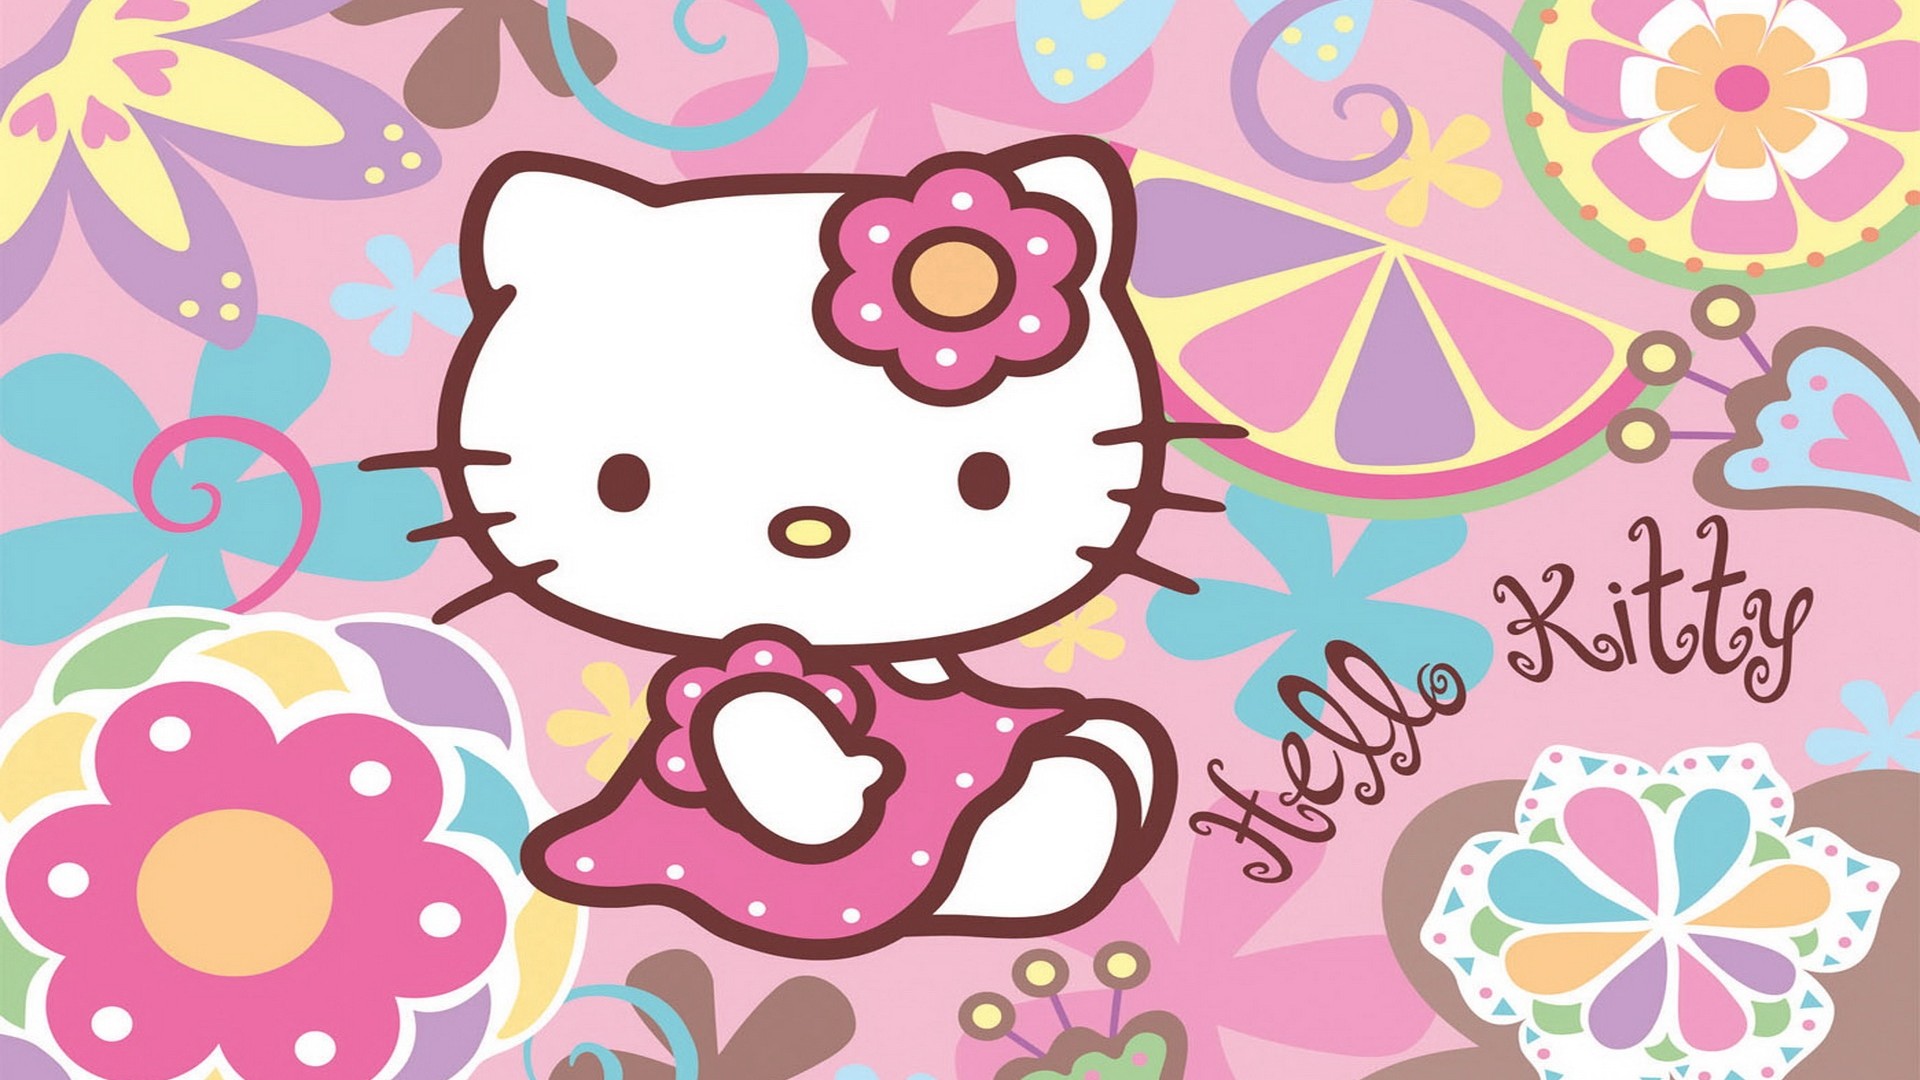 Hello Kitty Wallpaper with image resolution 1920x1080 pixel. You can use this wallpaper as background for your desktop Computer Screensavers, Android or iPhone smartphones